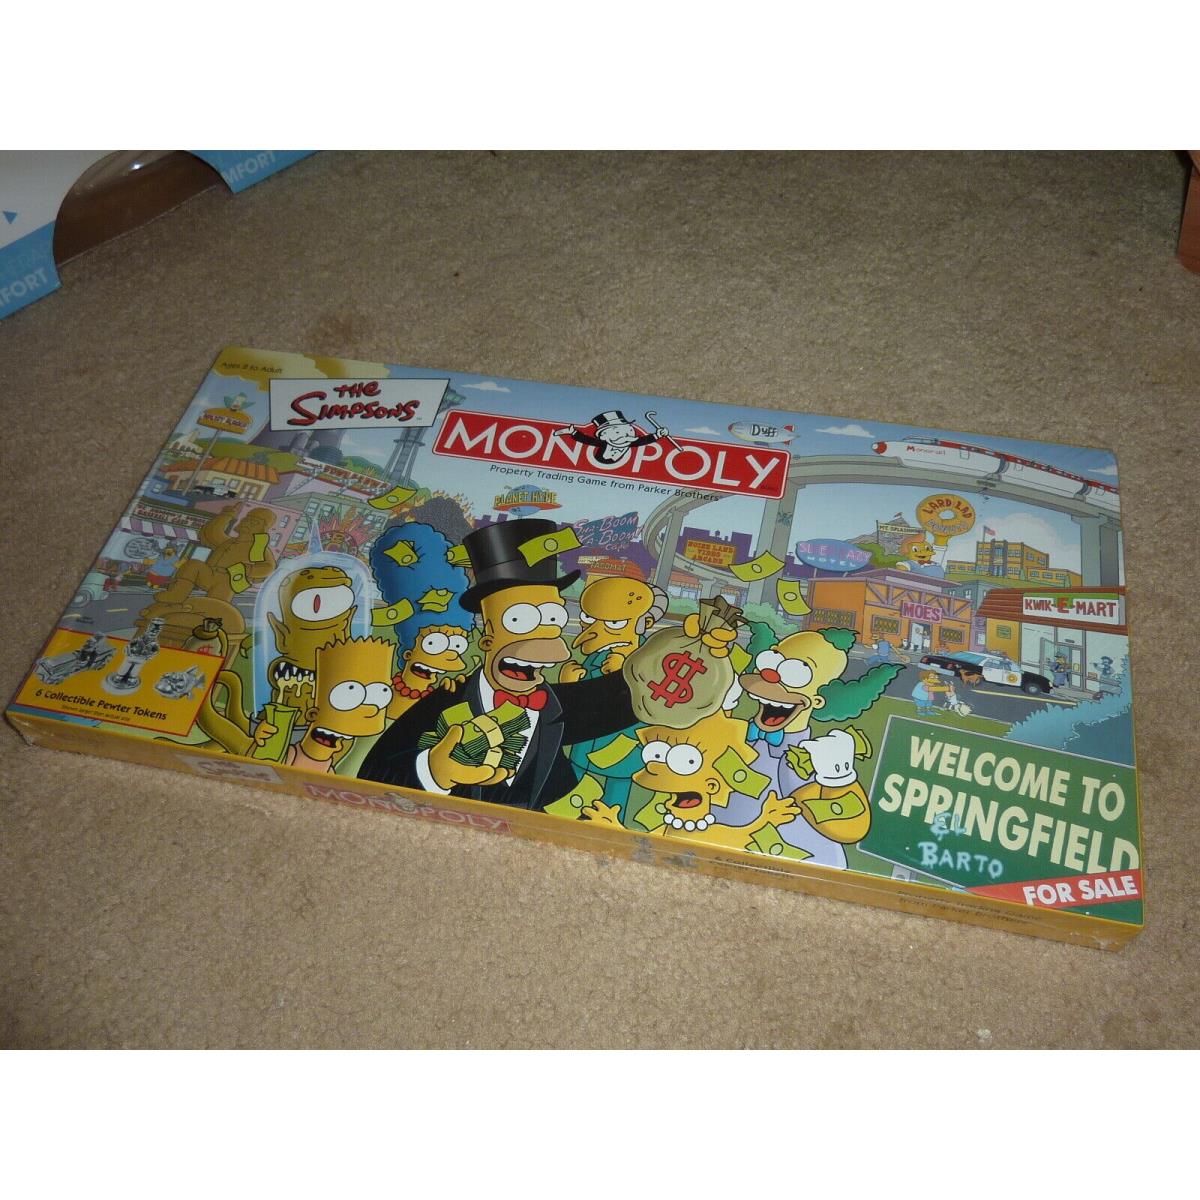 The Simpsons Monopoly Board Game 2001 Parker Brothers Hasbro